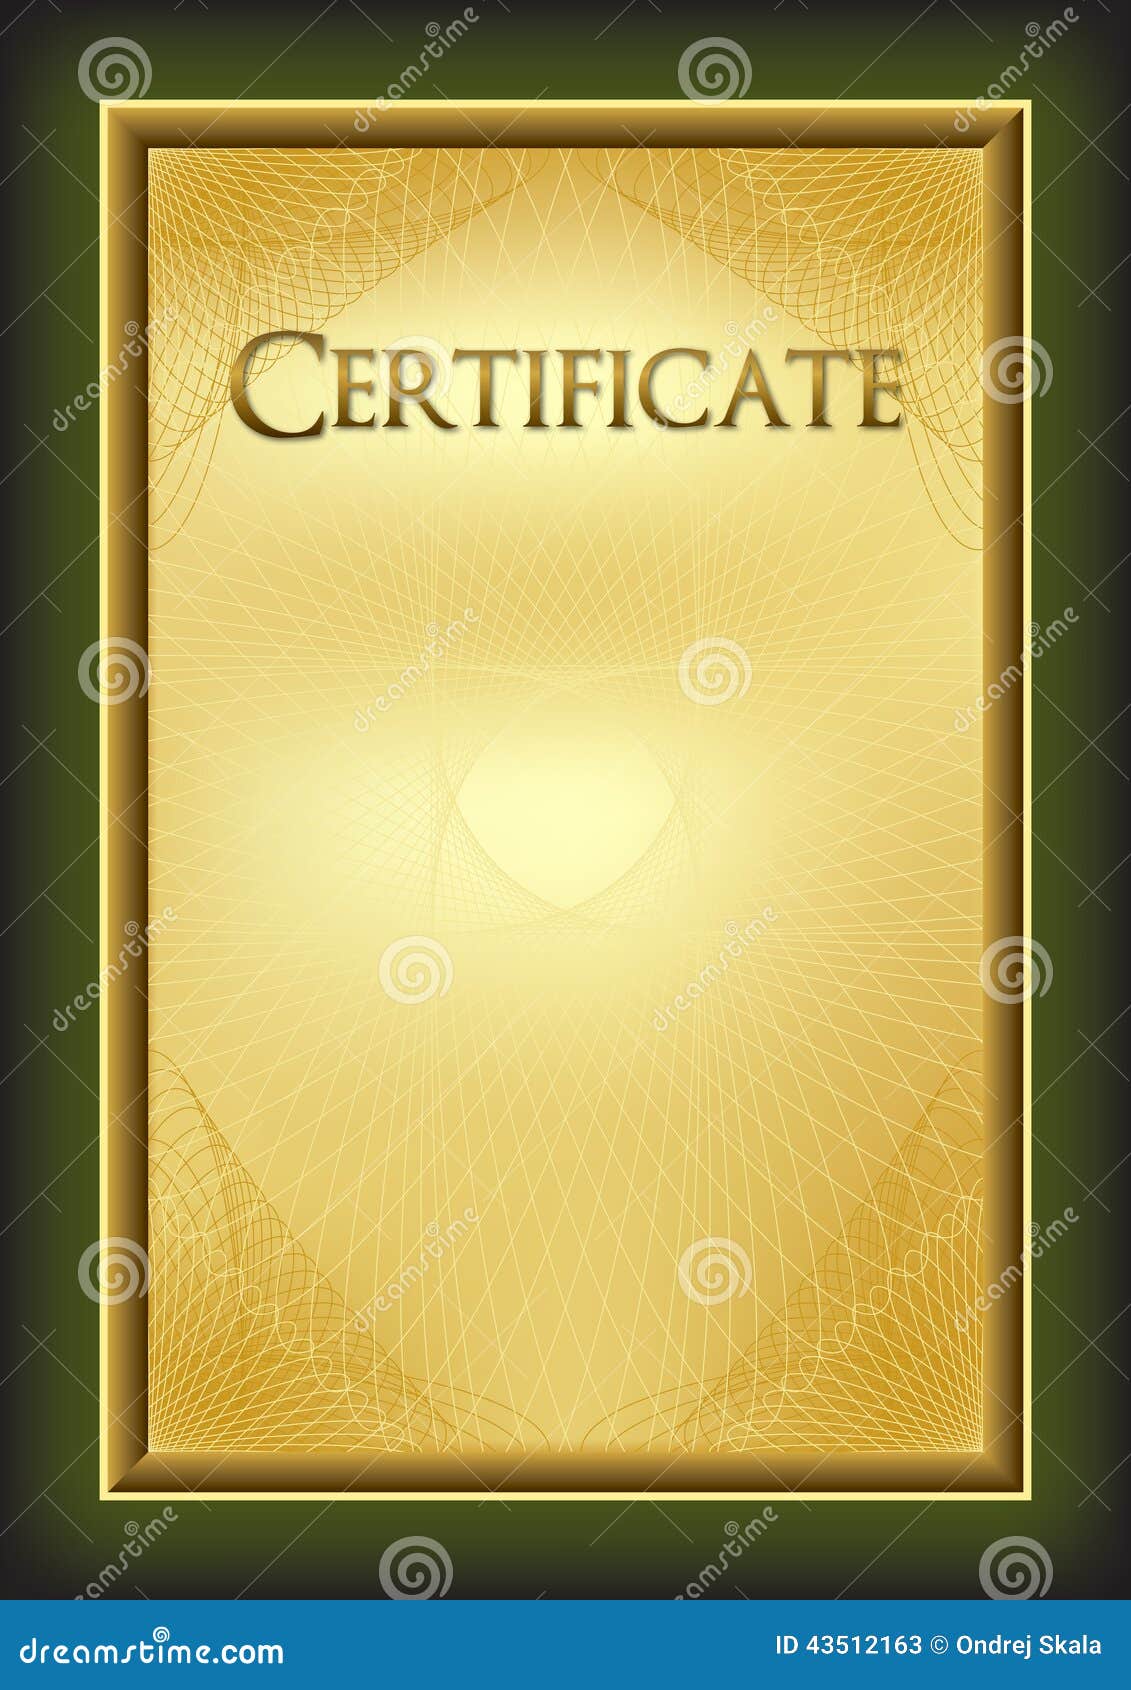 Certificate - Diploma - Award Stock Vector - Illustration of Pertaining To Commemorative Certificate Template